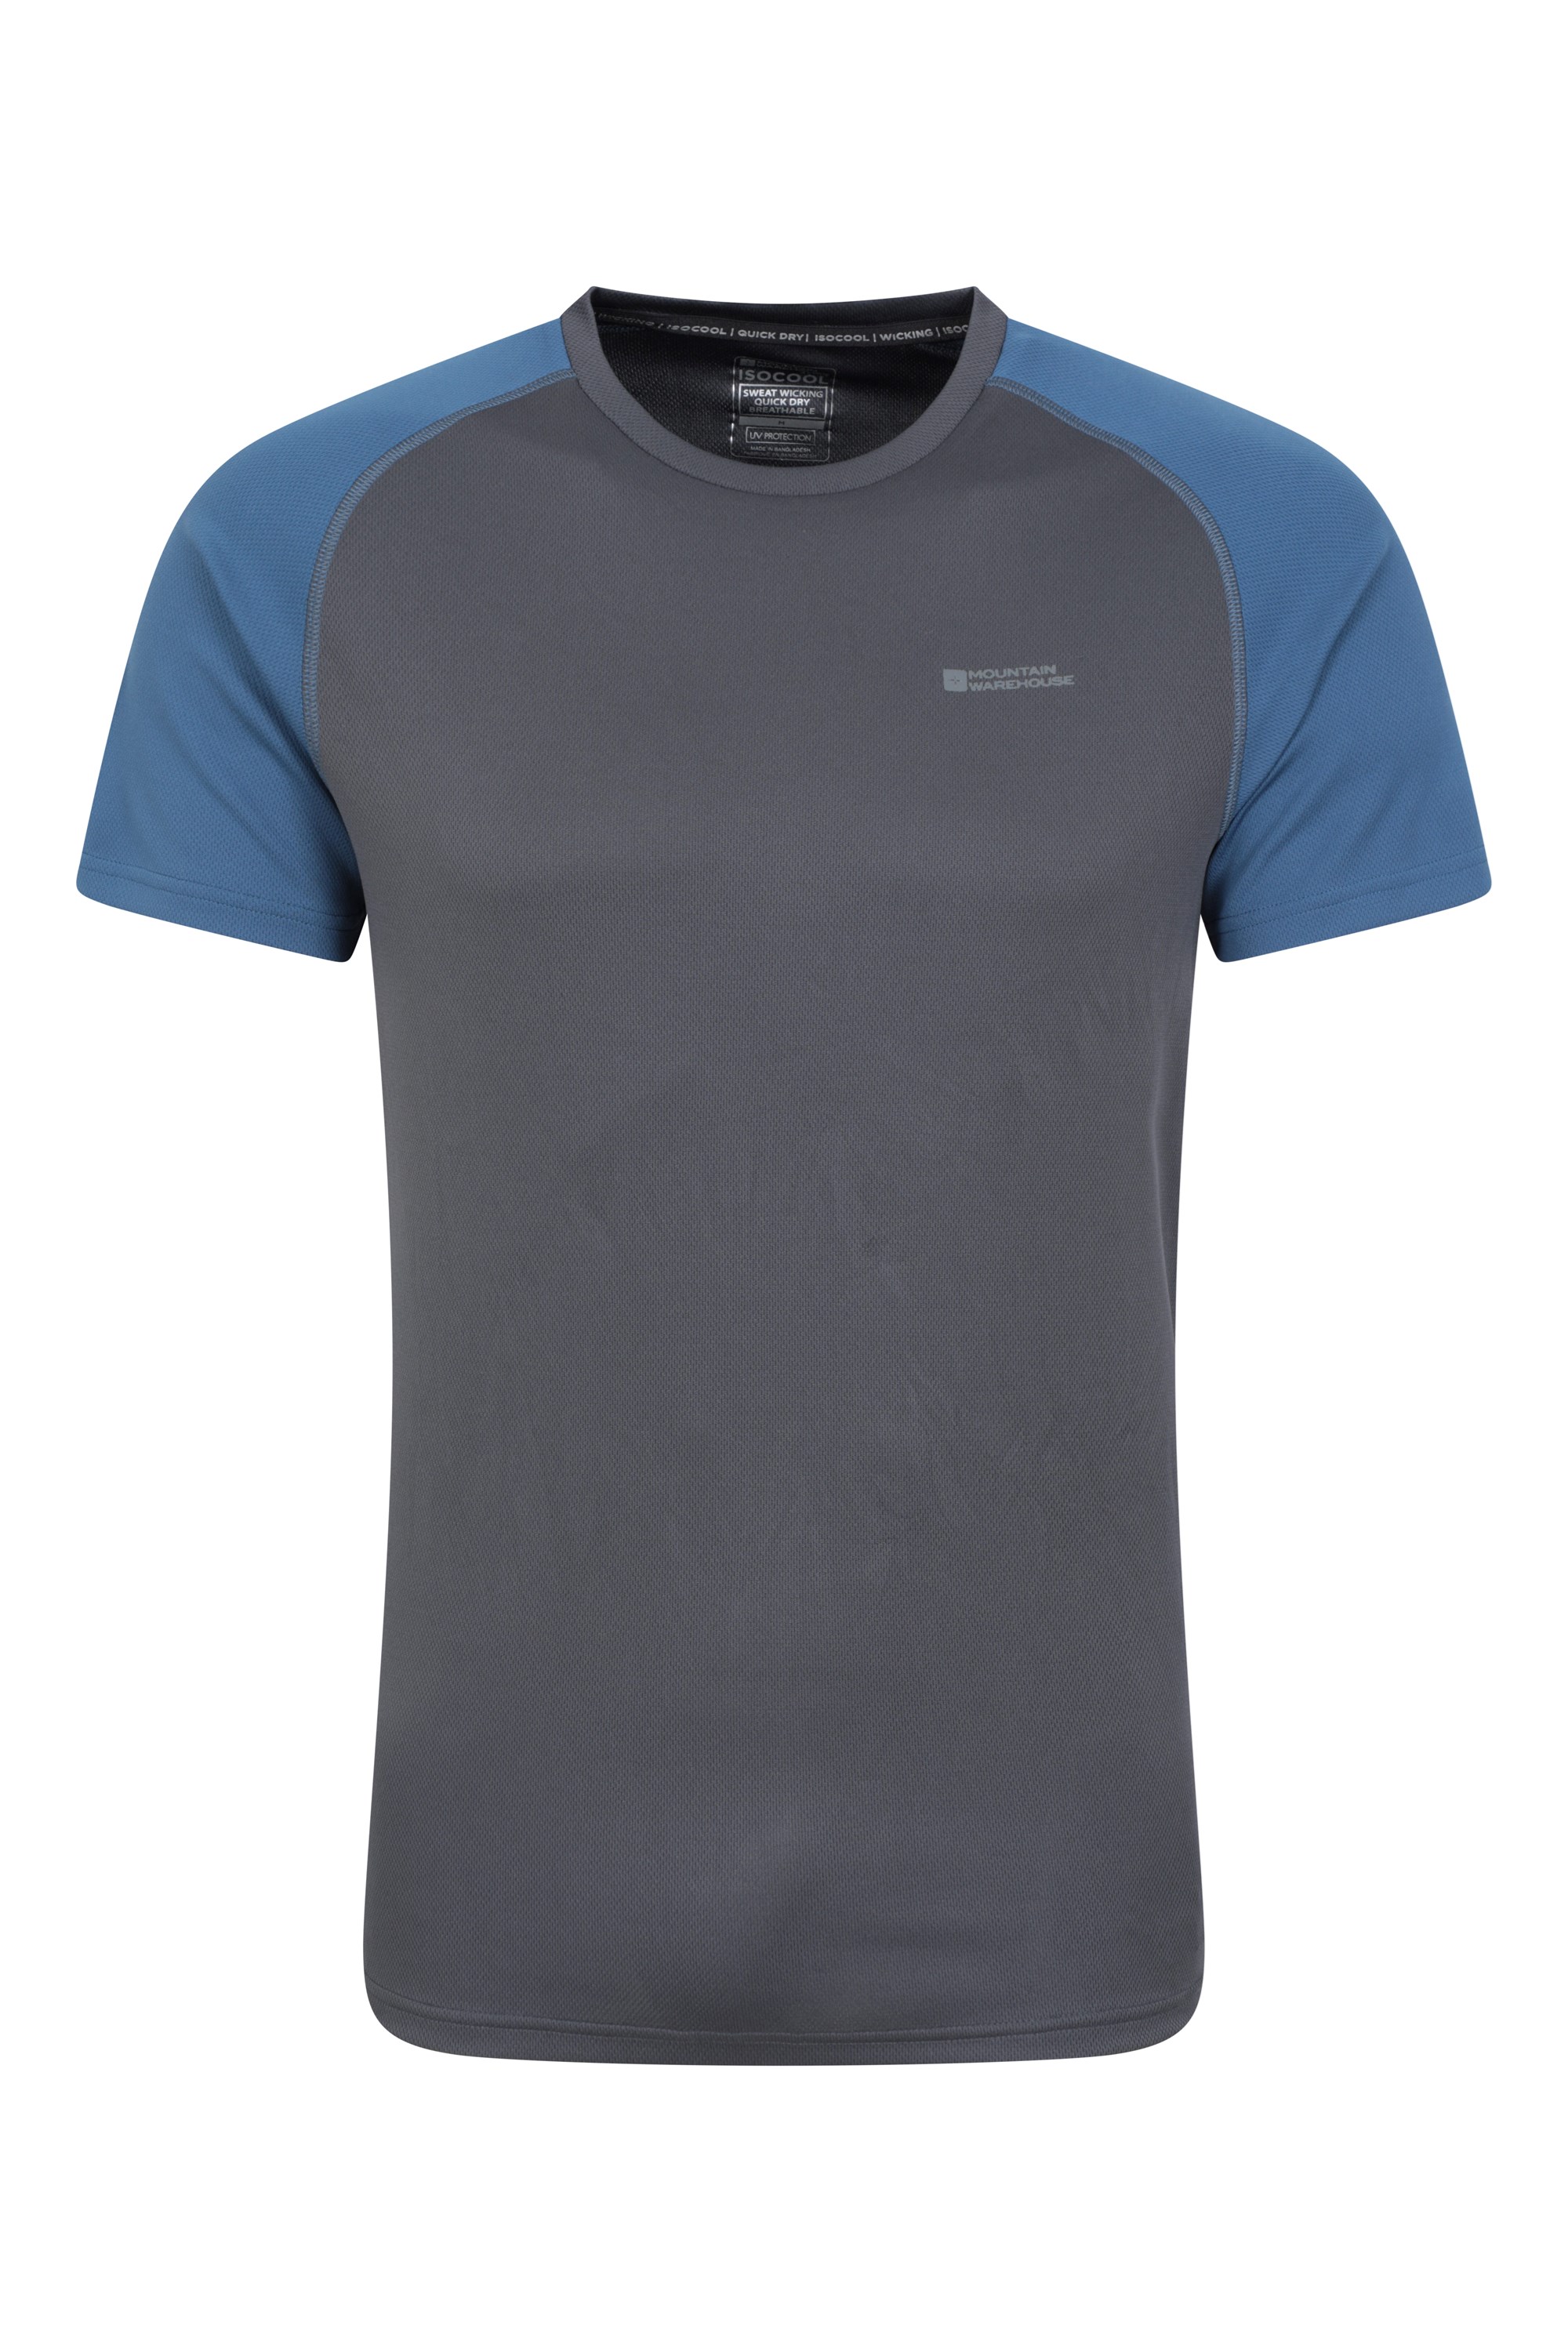 UV Protection Spring T-Shirt Mountain Warehouse IsoCool Mens Tee Quick Drying Top Running High Wicking Gym Ideal for Hiking Lightweight Tee Shirt Travelling 